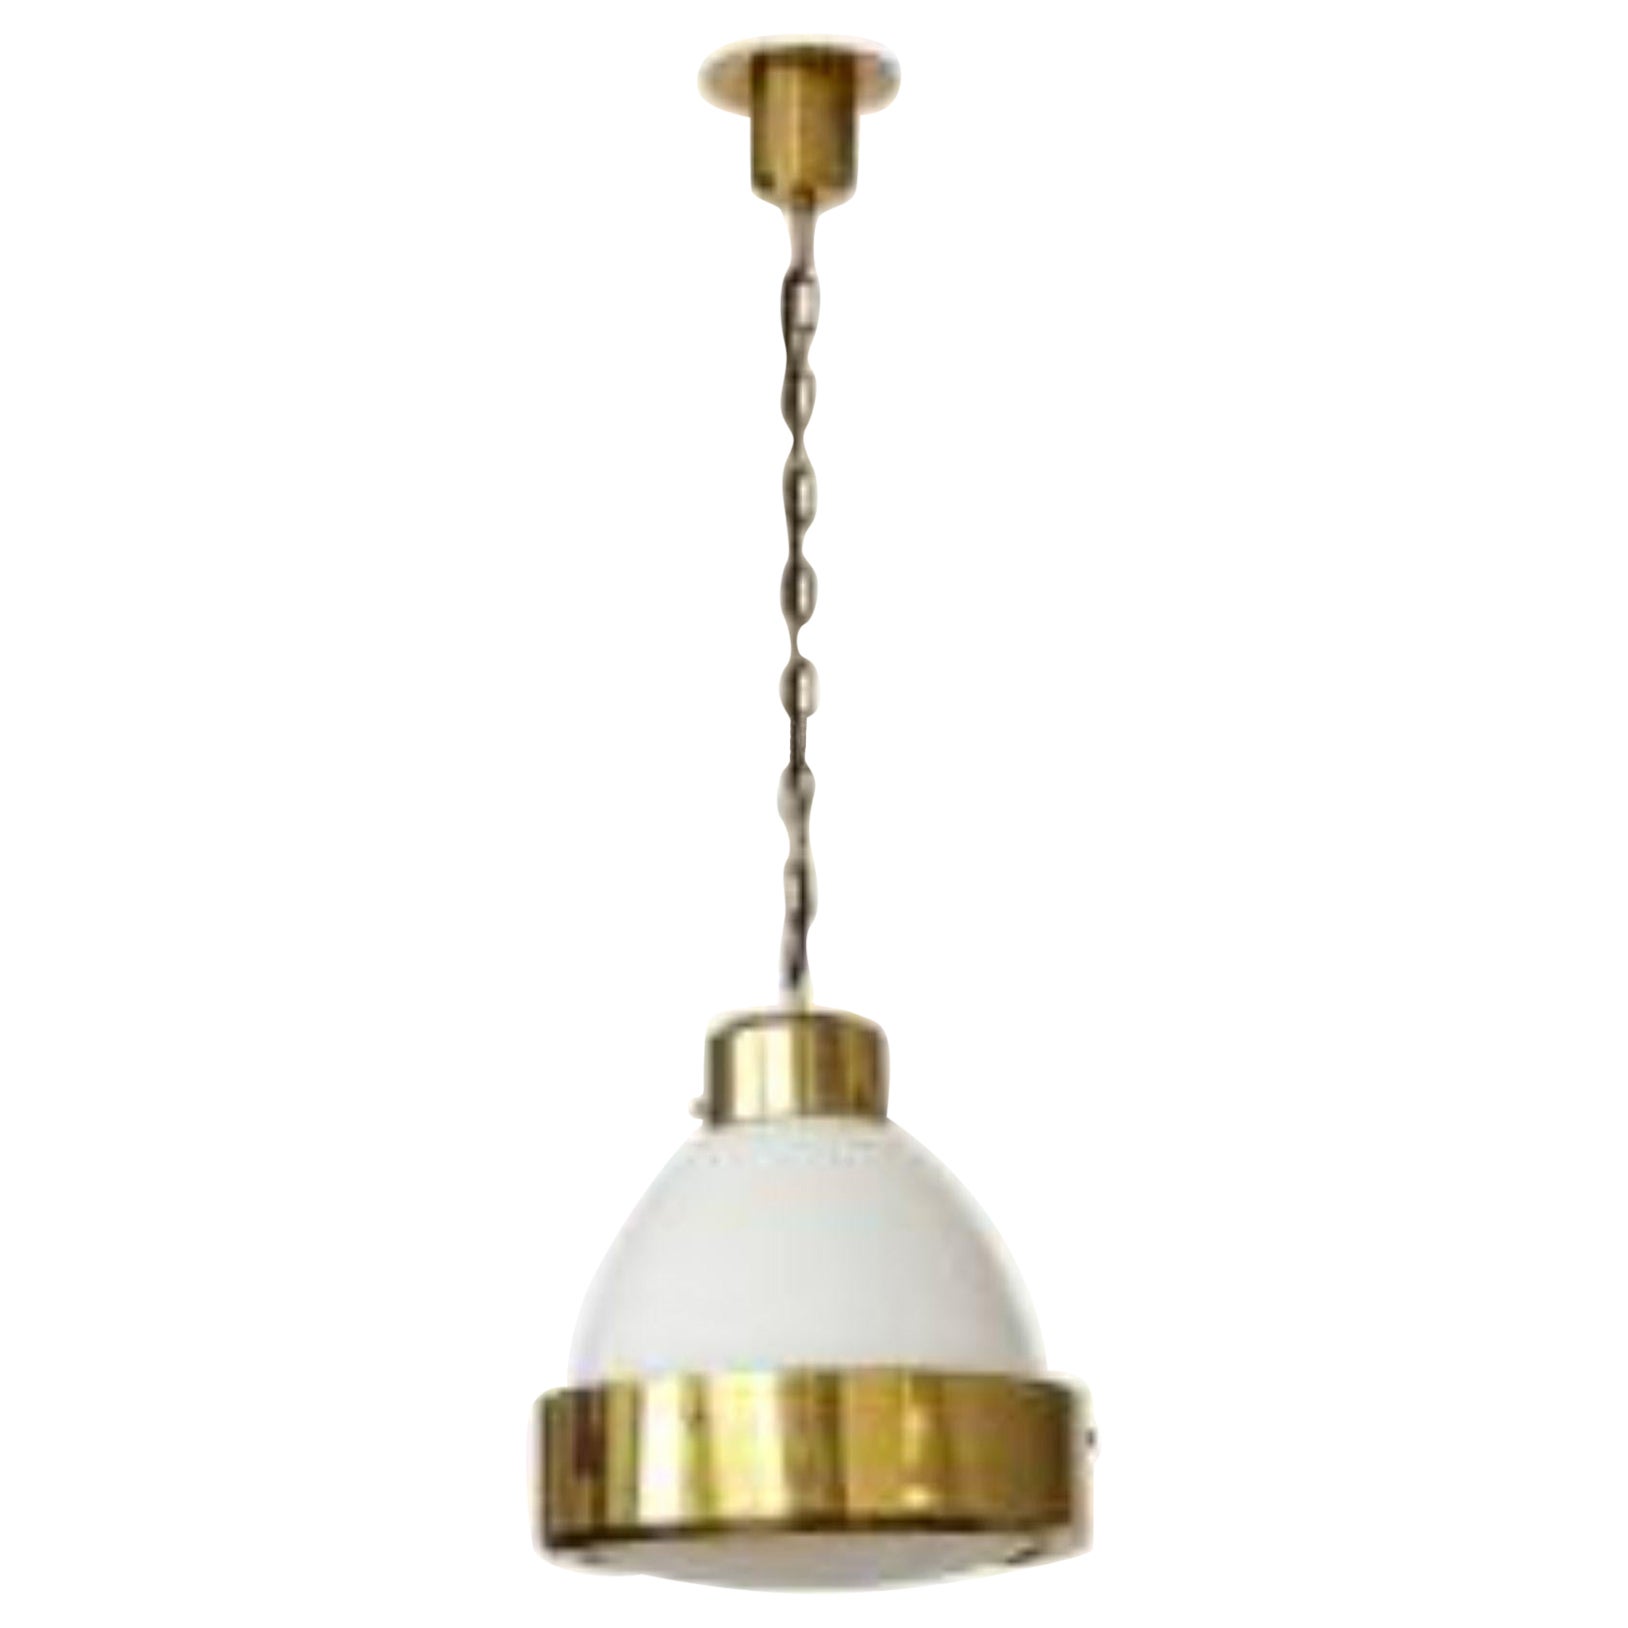 Midcentury Pendant in Brass and White Opaline Glass, Mid-20th Century For Sale